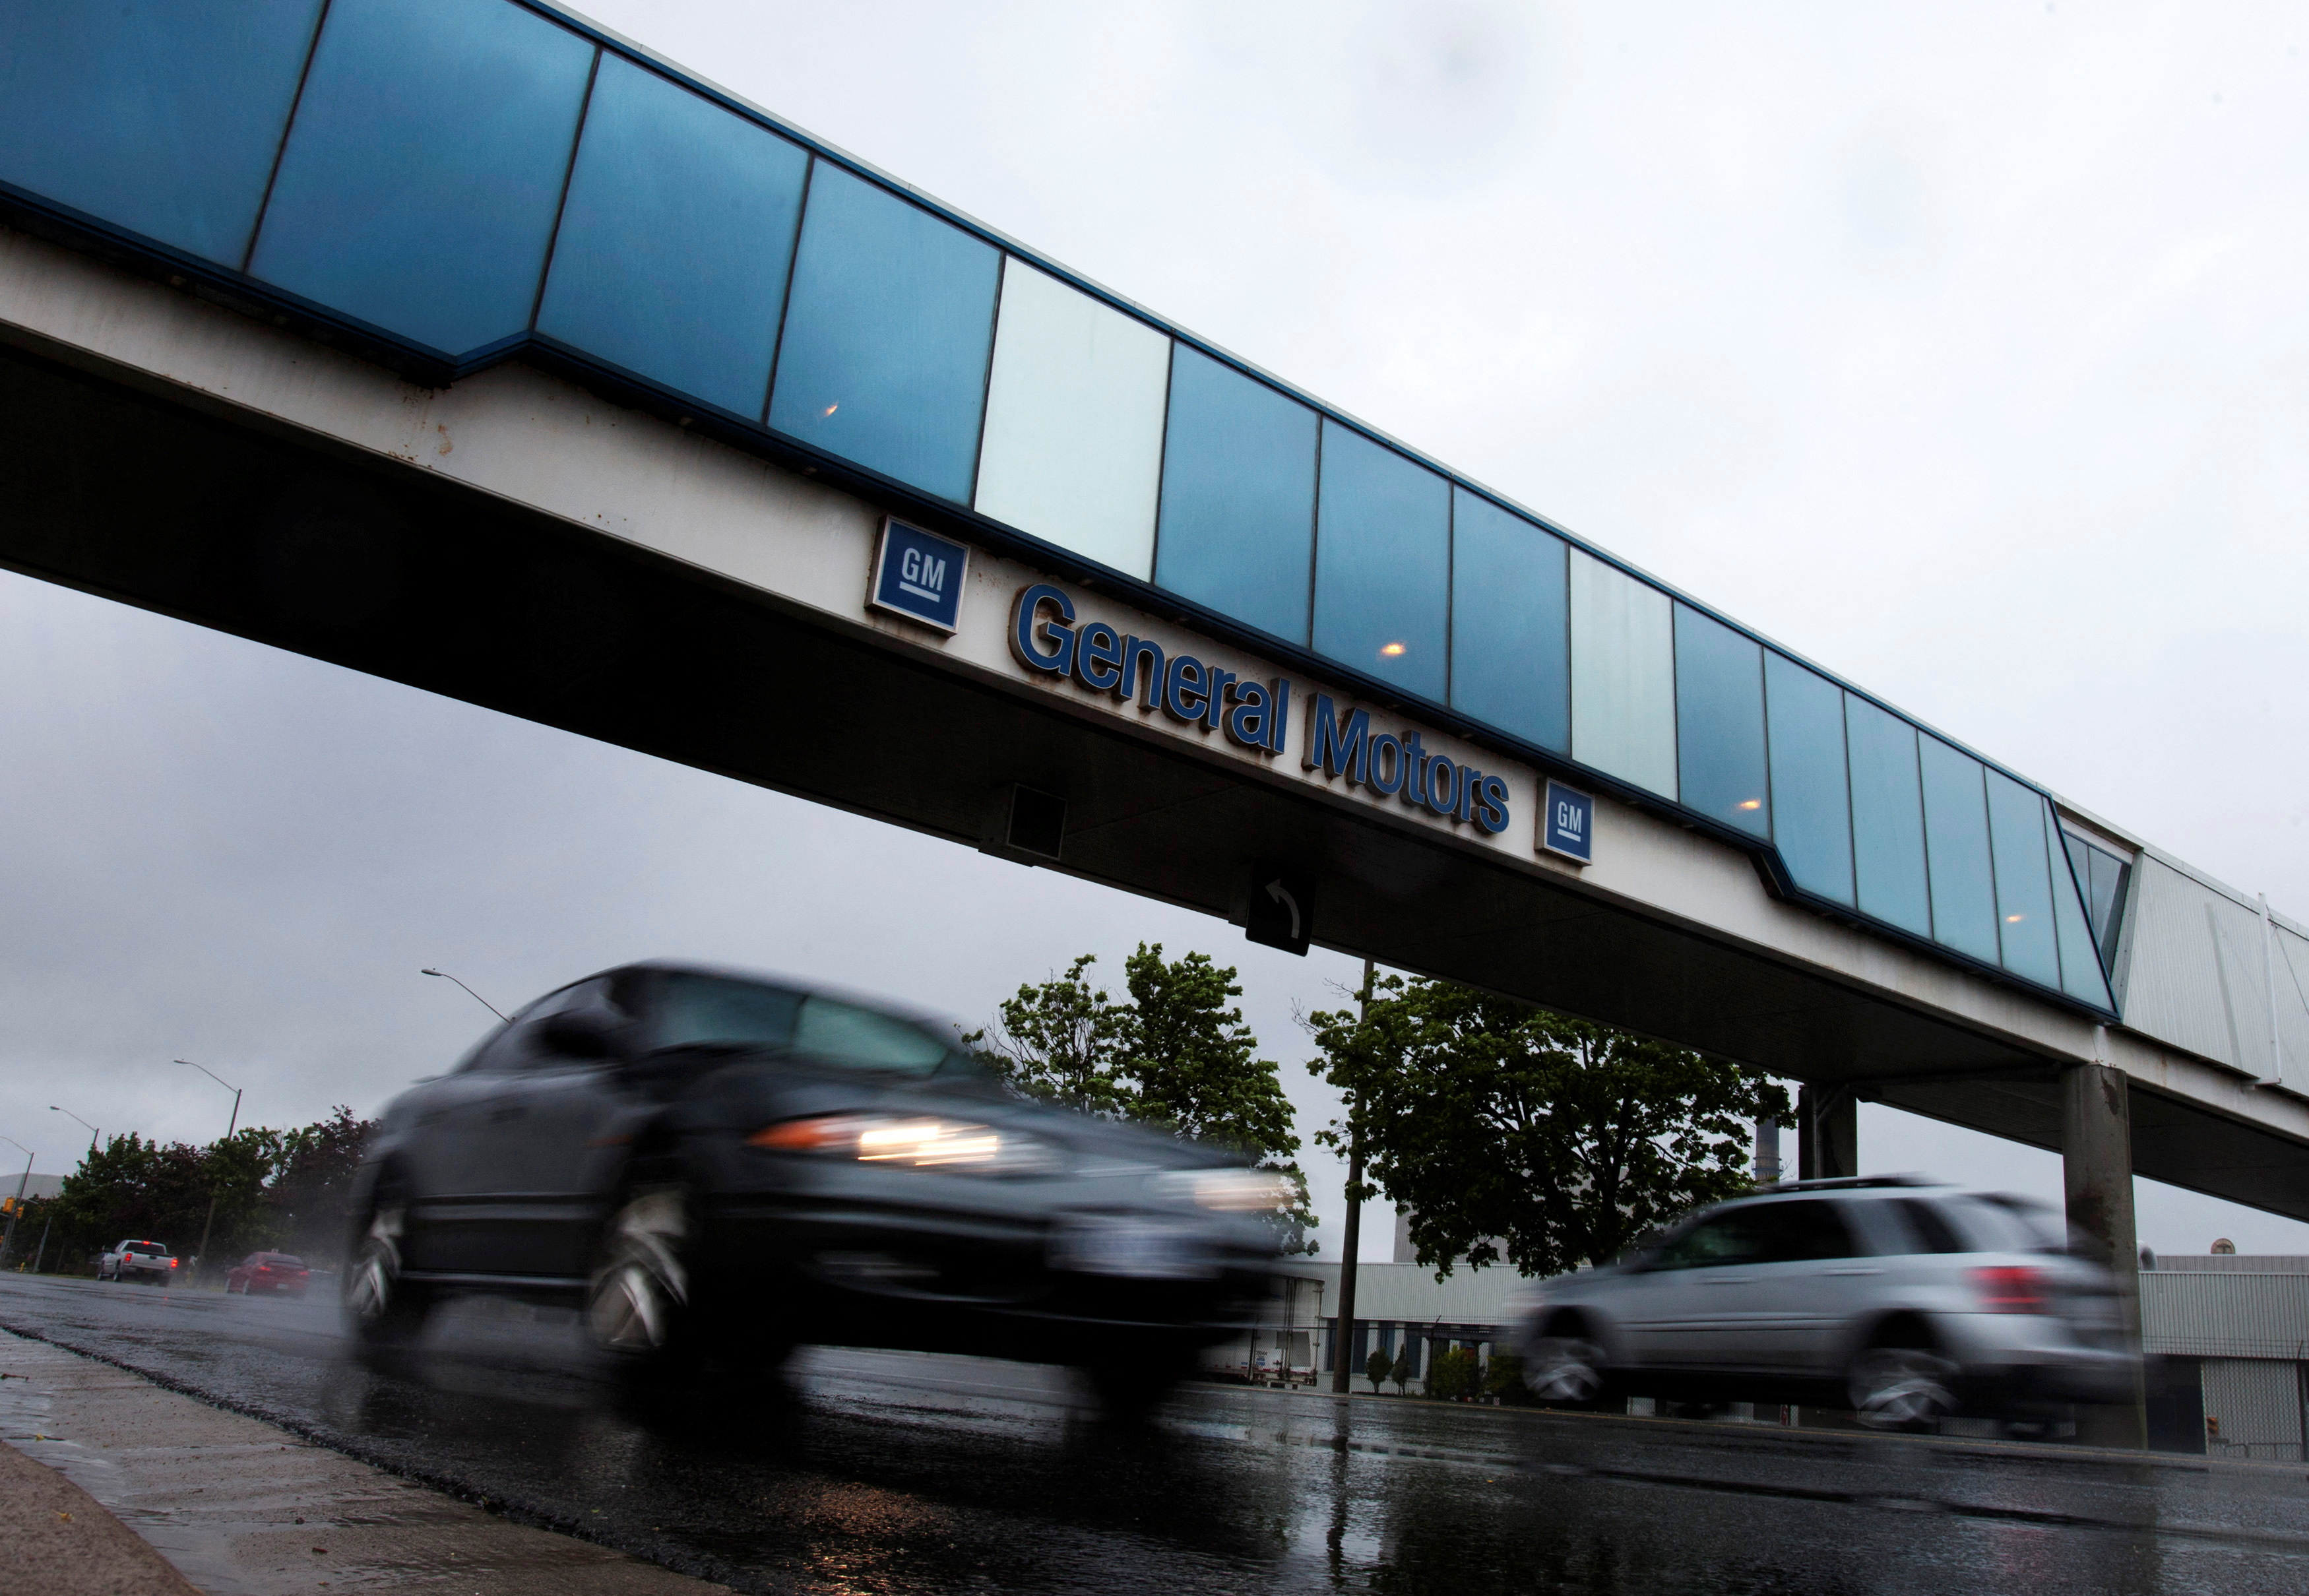 Cars pass under an overpass at the General Motors Car assembly plant in Oshawa